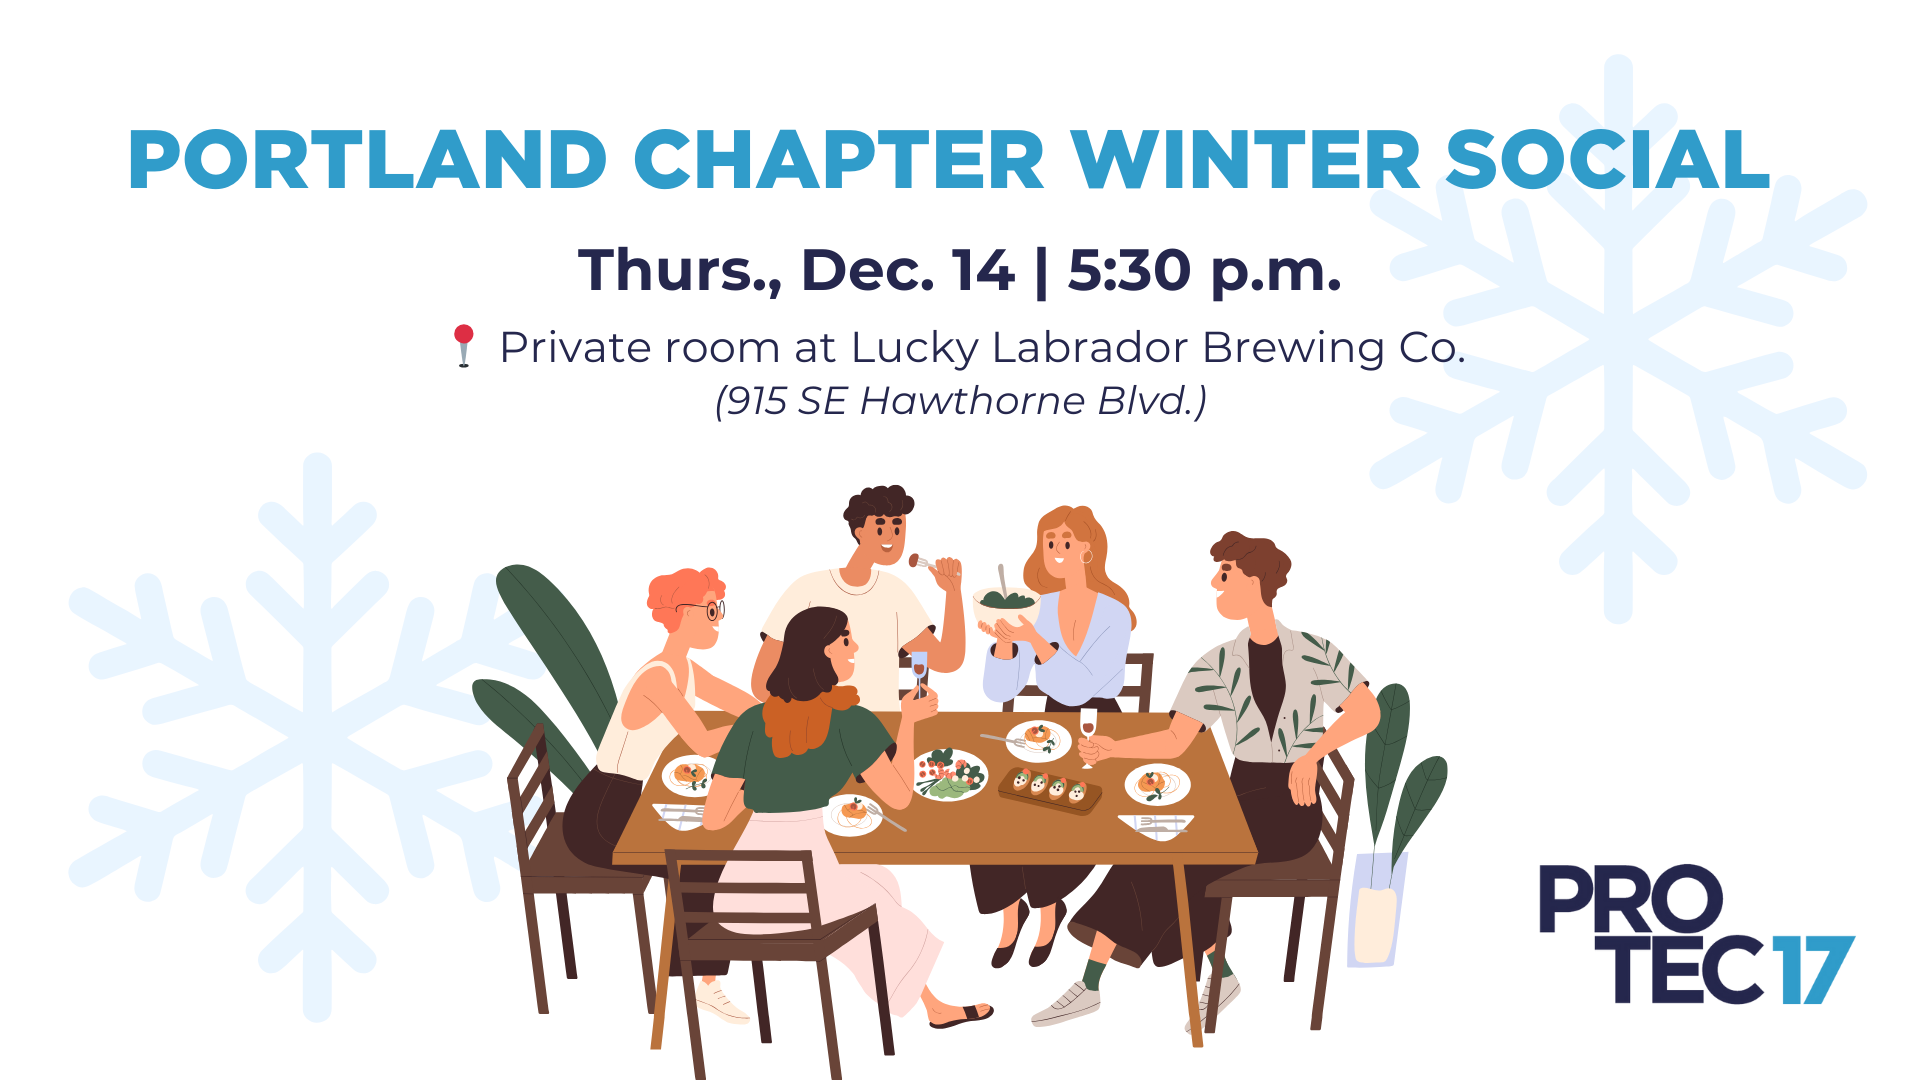 Text reads, "PROTEC17 Portland Chapter Winter Social | Thurs., Dec. 14 | 5:30 p.m. | Private room at Lucky Labrador Brewing Co. (915 SE Hawthorne Blvd)." There are snowflake illustrations in the background and a colorful illustration of people gathering together for food and drinks.